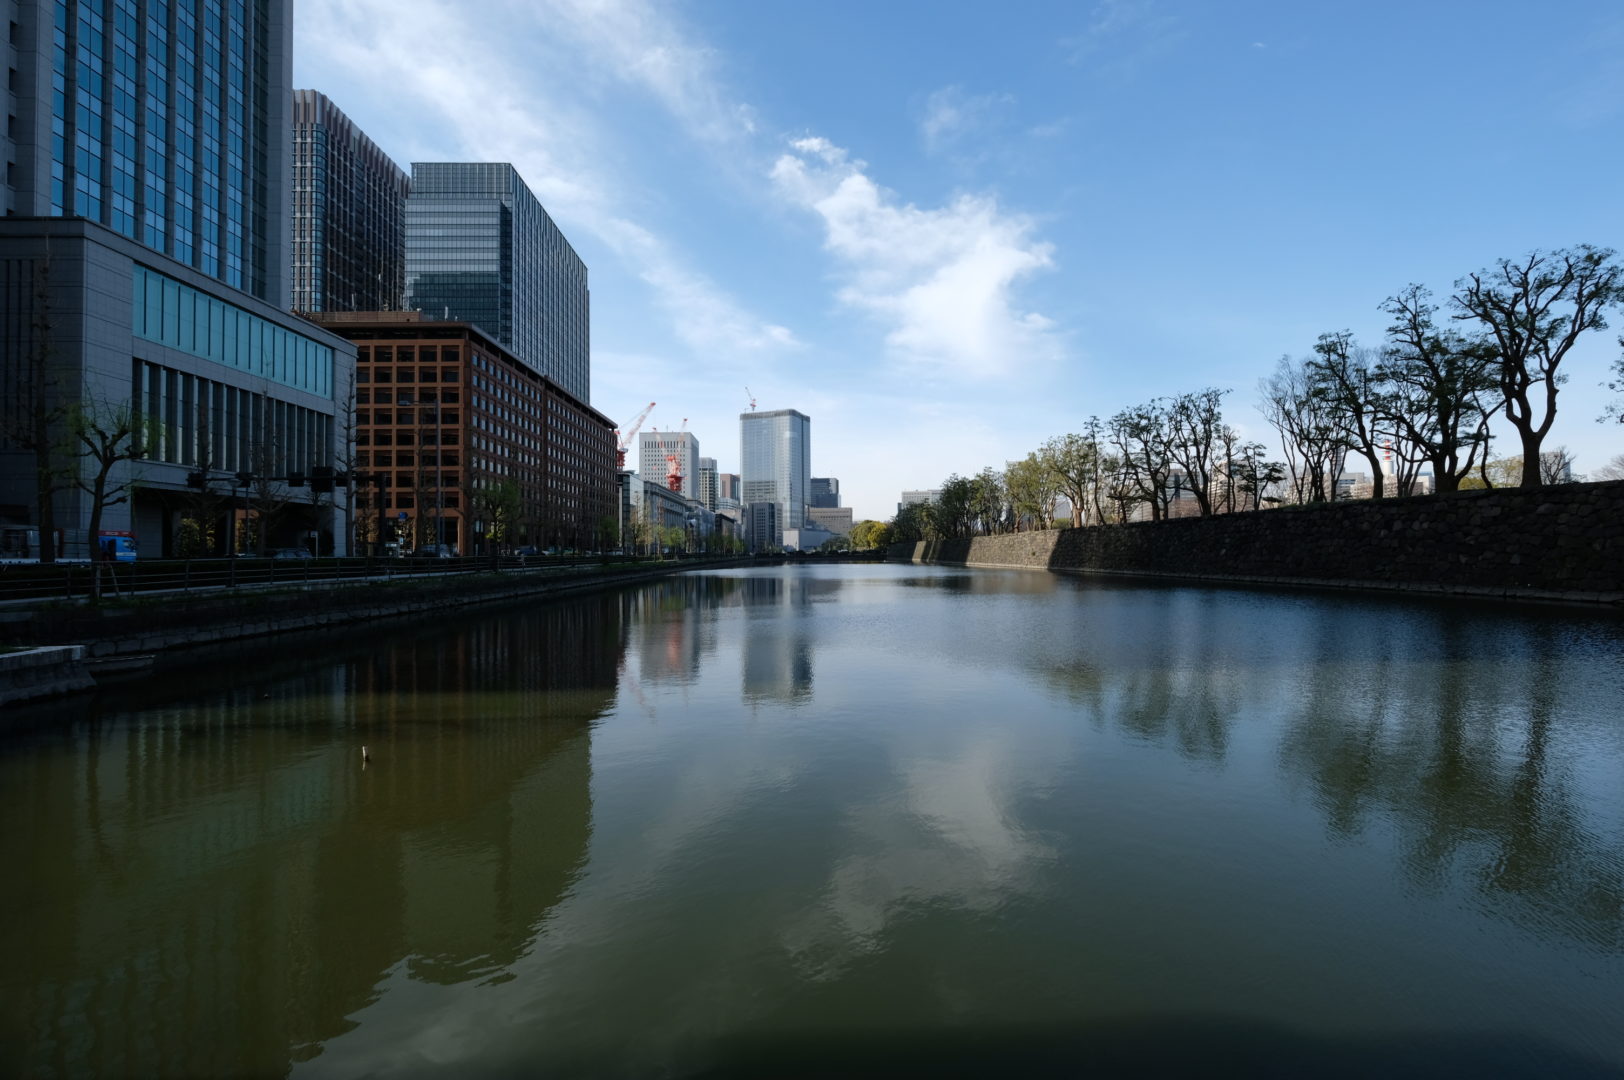 A Tokyo cityscape that includes the moat around the Imperial Palace